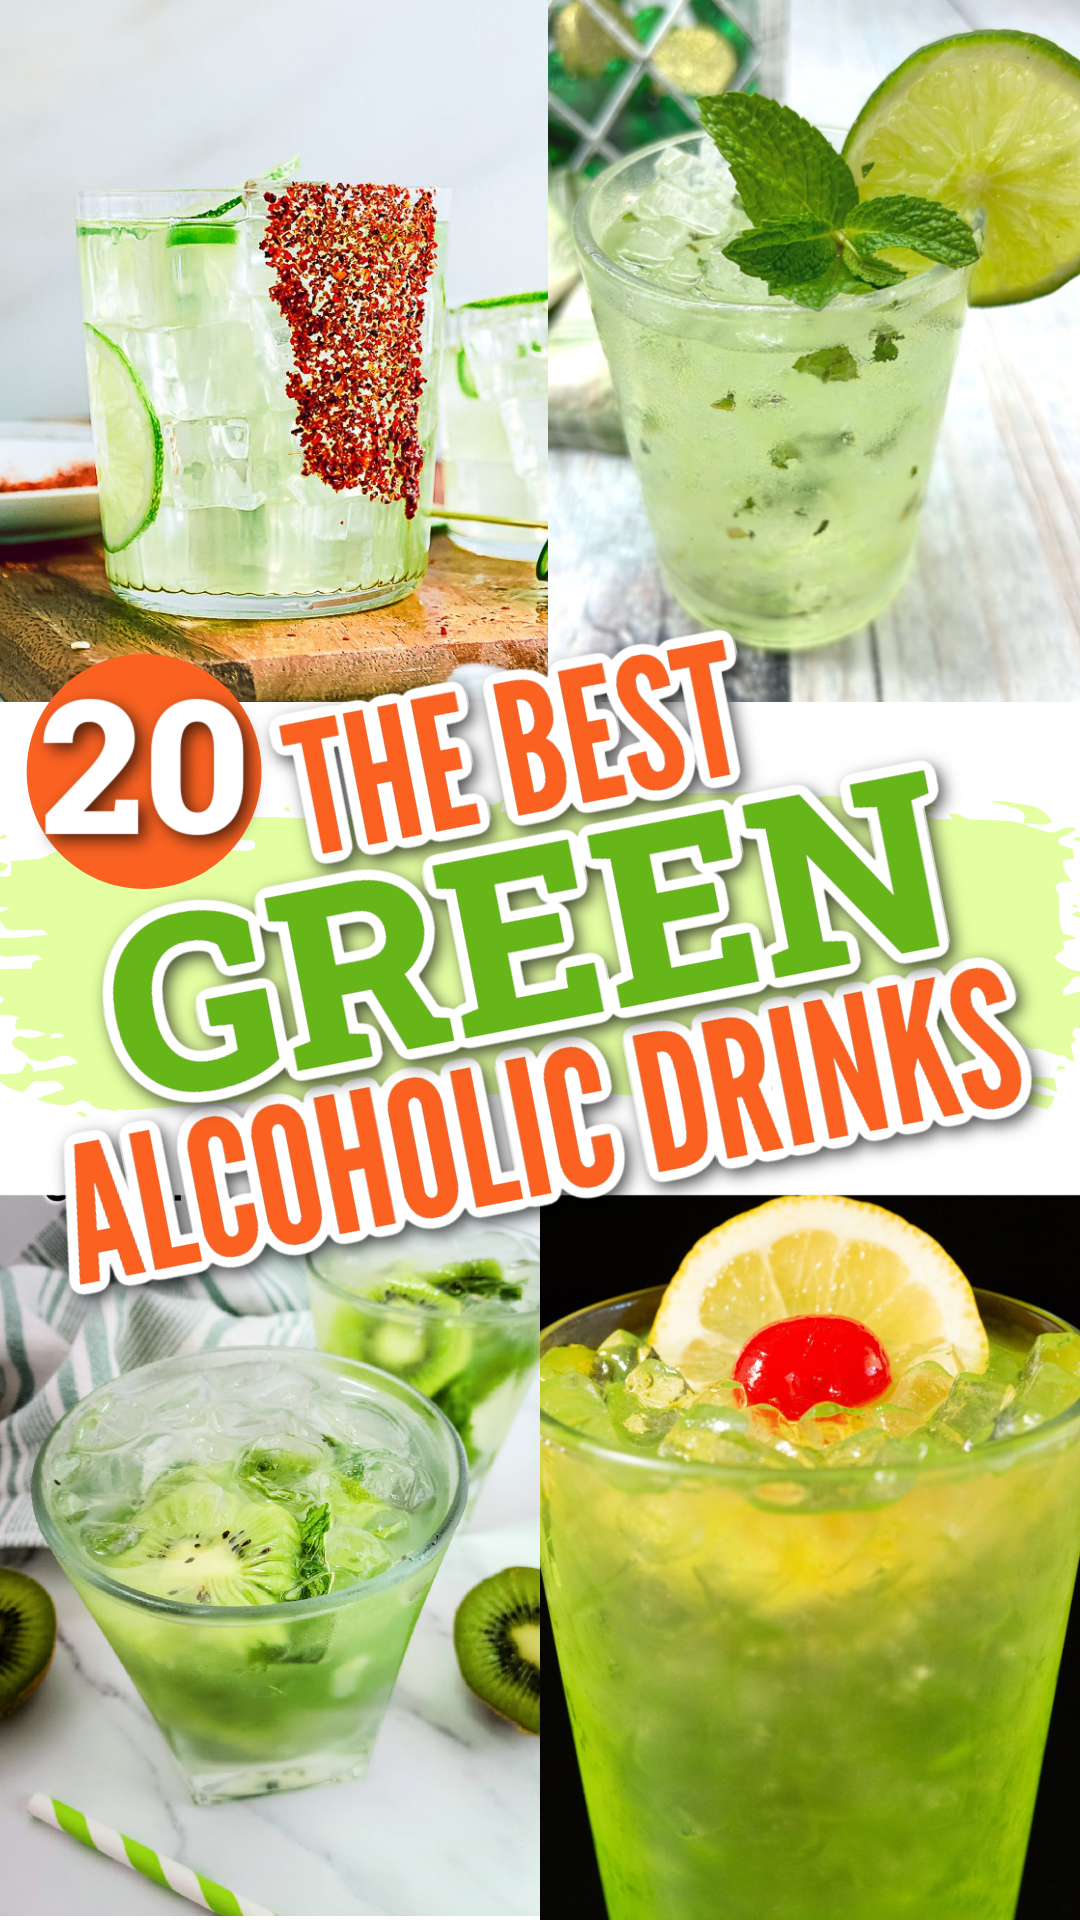 A collage of green alcoholic drinks including kiwi mojito, green martini, mojitos and green margaritas.